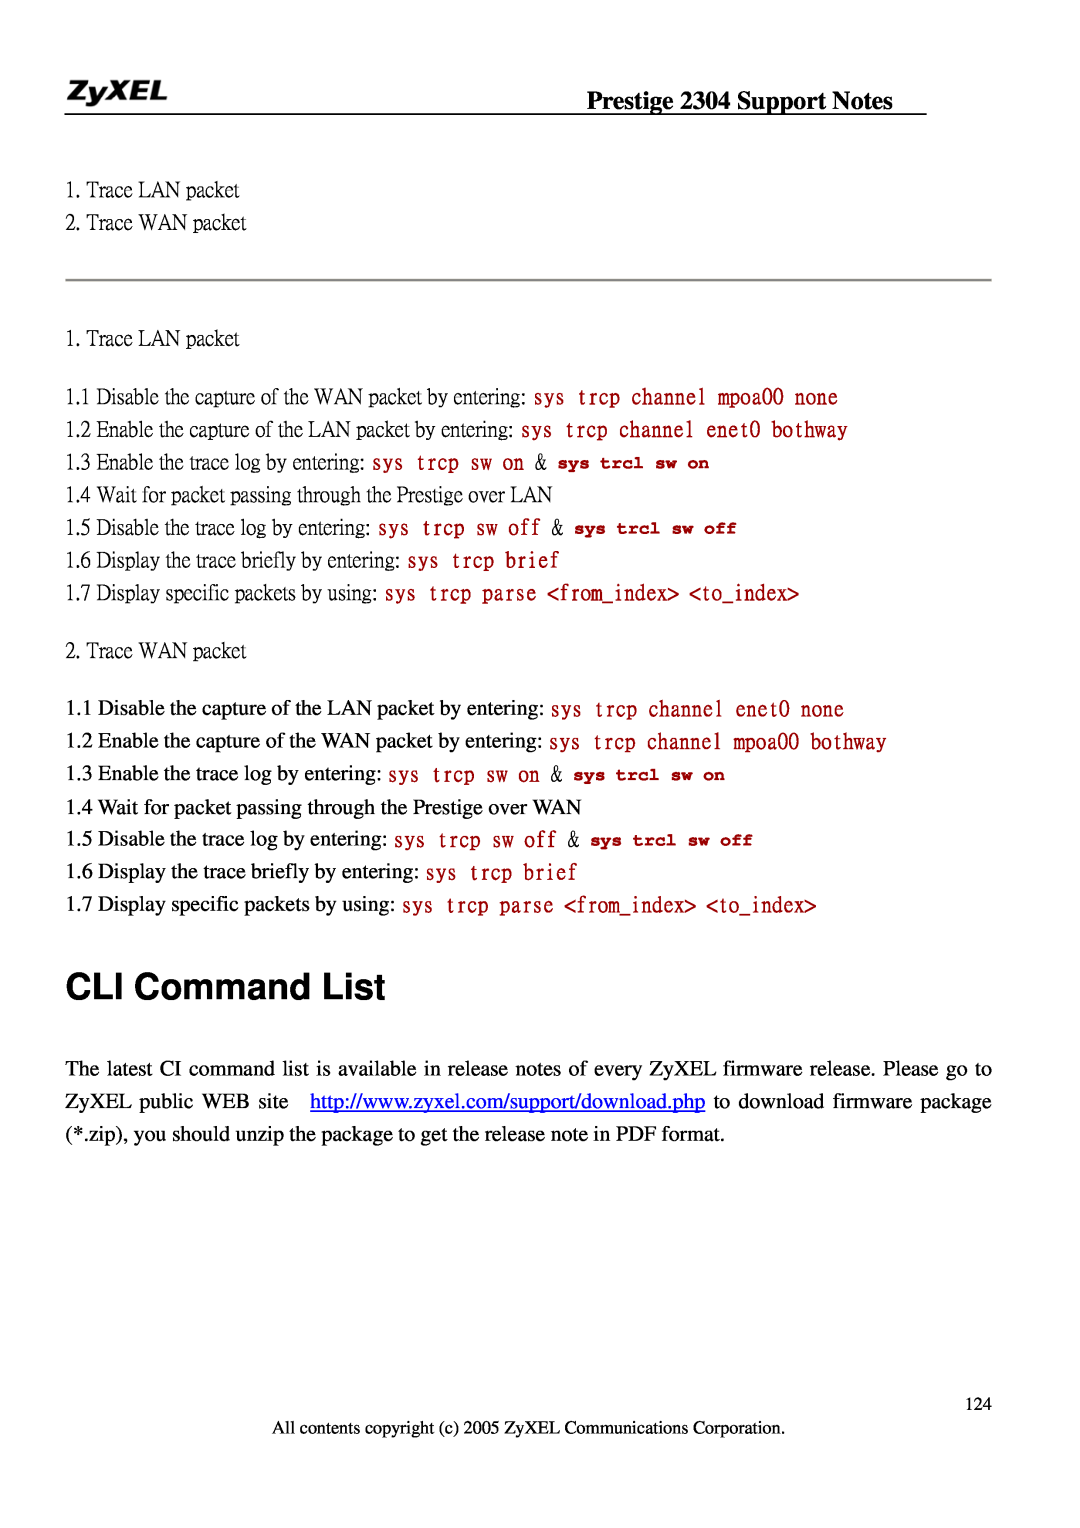 ZyXEL Communications 2304R-P1 manual CLI Command List, Prestige 2304 Support Notes 